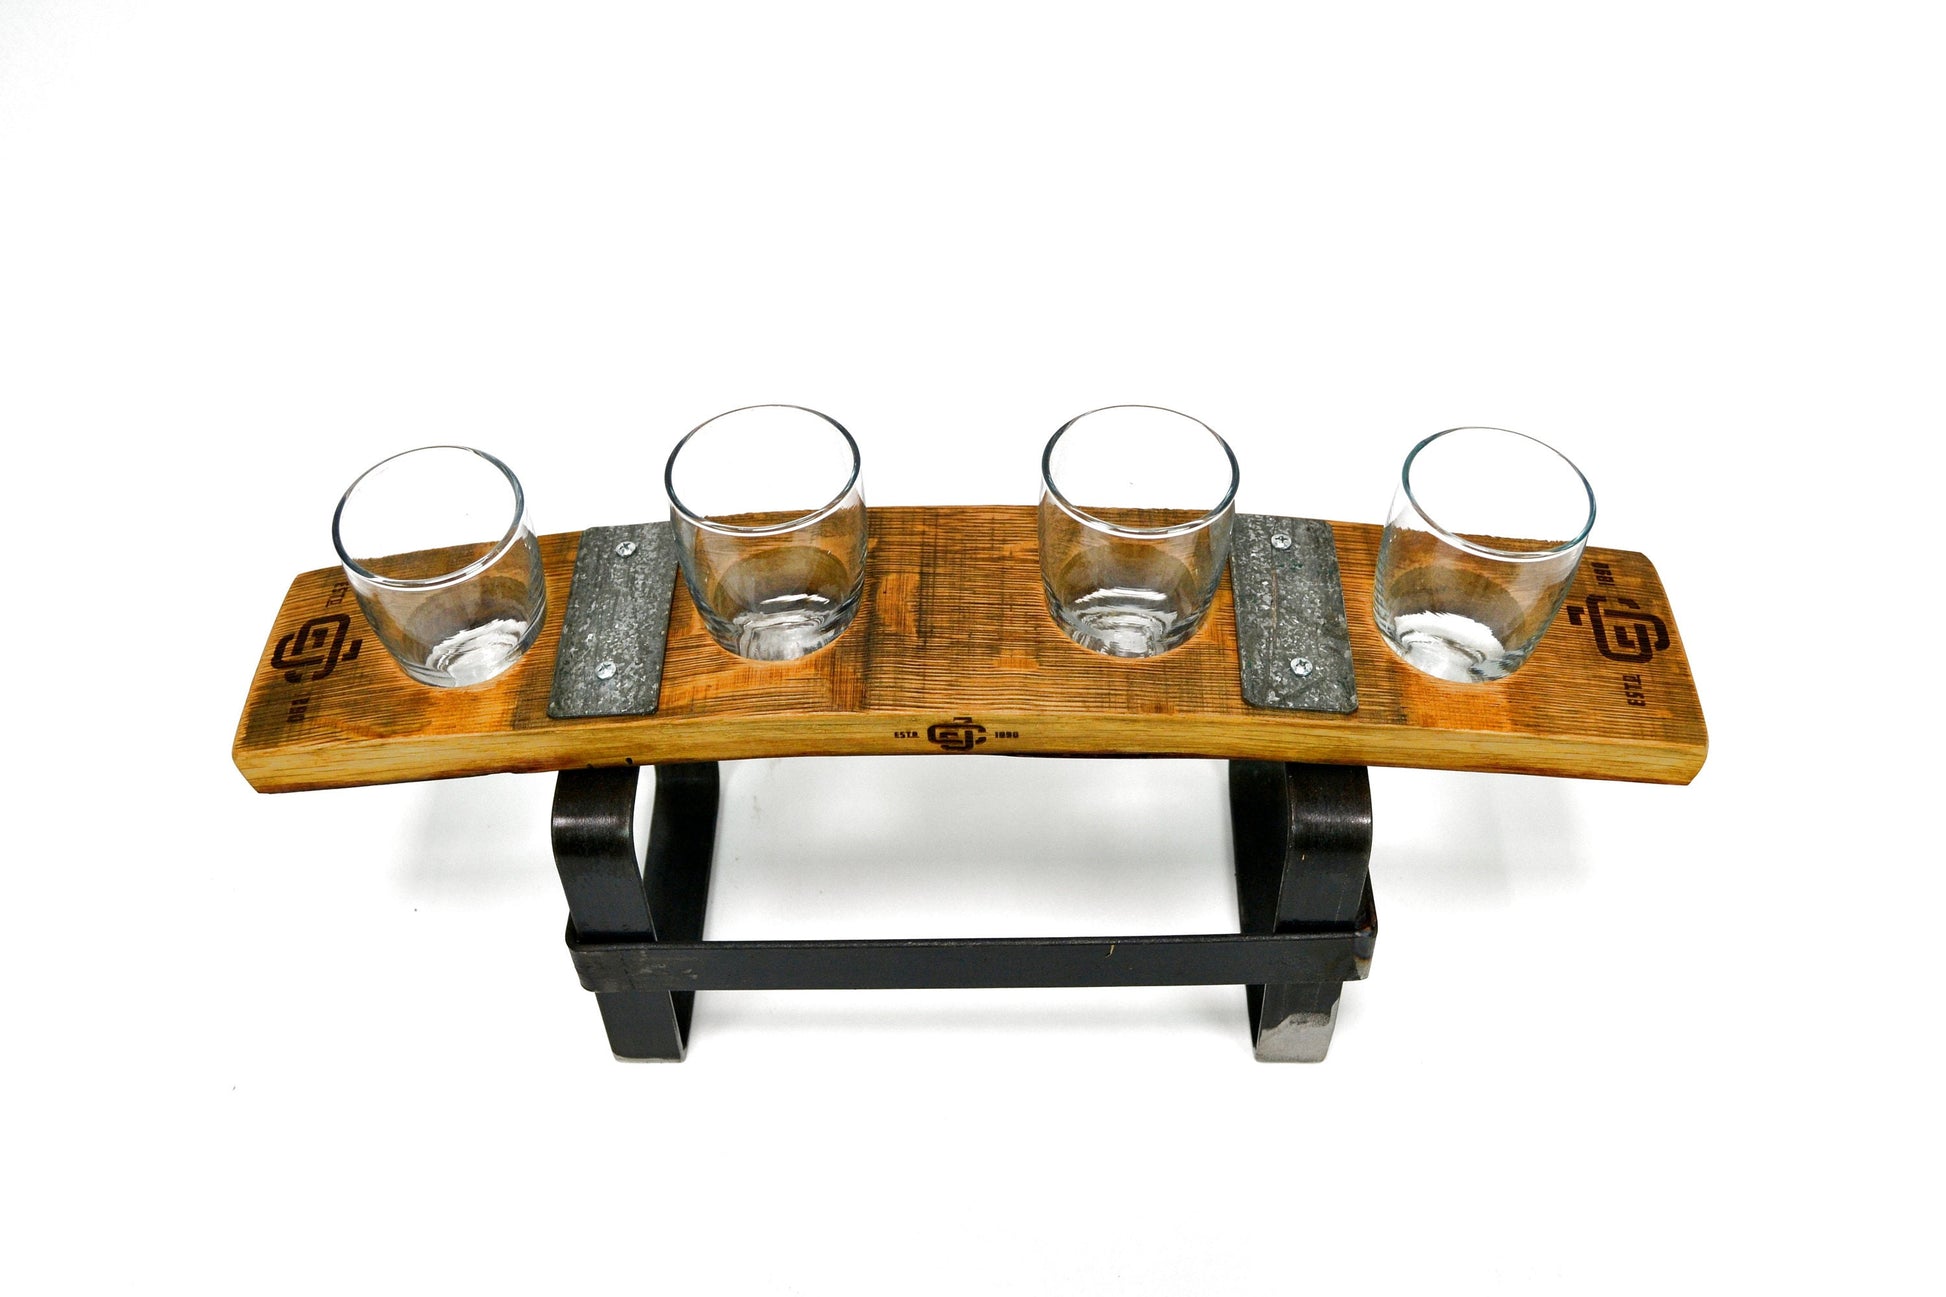 Barrel Stave & Steel Beer Flight - Safata - made from retired Napa wine barrels. 100% Recycled!